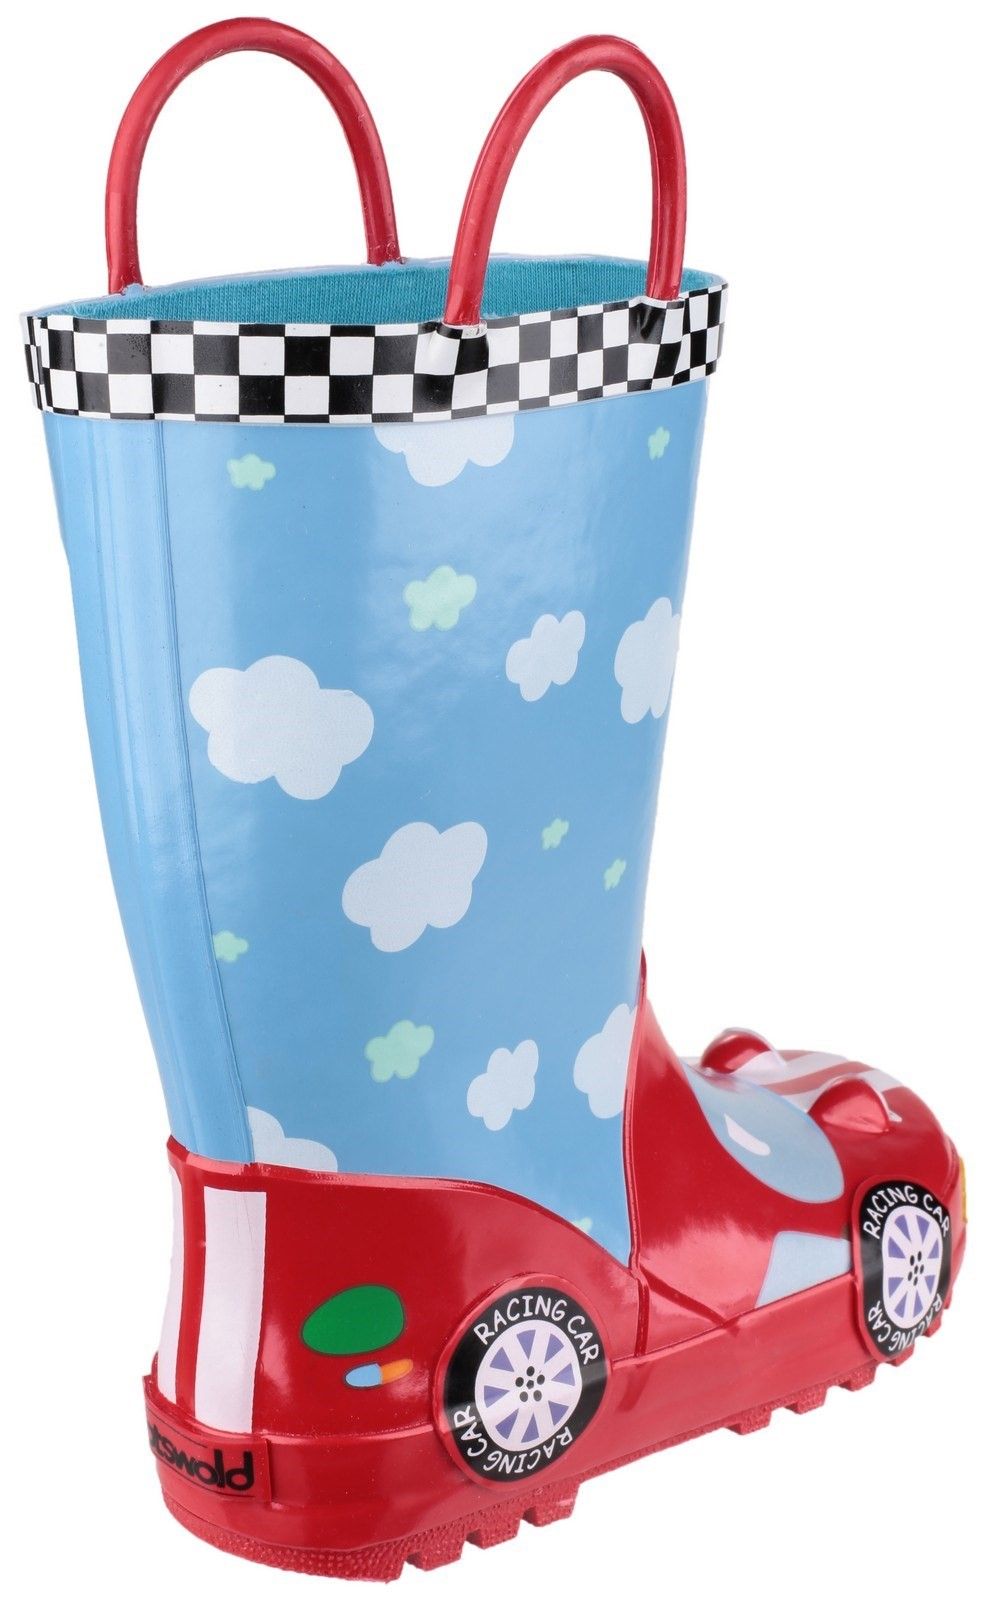 These fun children's wellington boots are perfect for playing outside even if the weather isn't great. A rubber upper and sole keep your children's feet dry. Handles at the top make it easy for them to put on and also for you to carry around. Cotswold Childrens Puddle Boot Natural Rubber Exterior Synthetic Comfortable Lining Easy Pull On Handles Non Skid Sole Fun and Funky Bright design Perfect for Jumping in Puddles